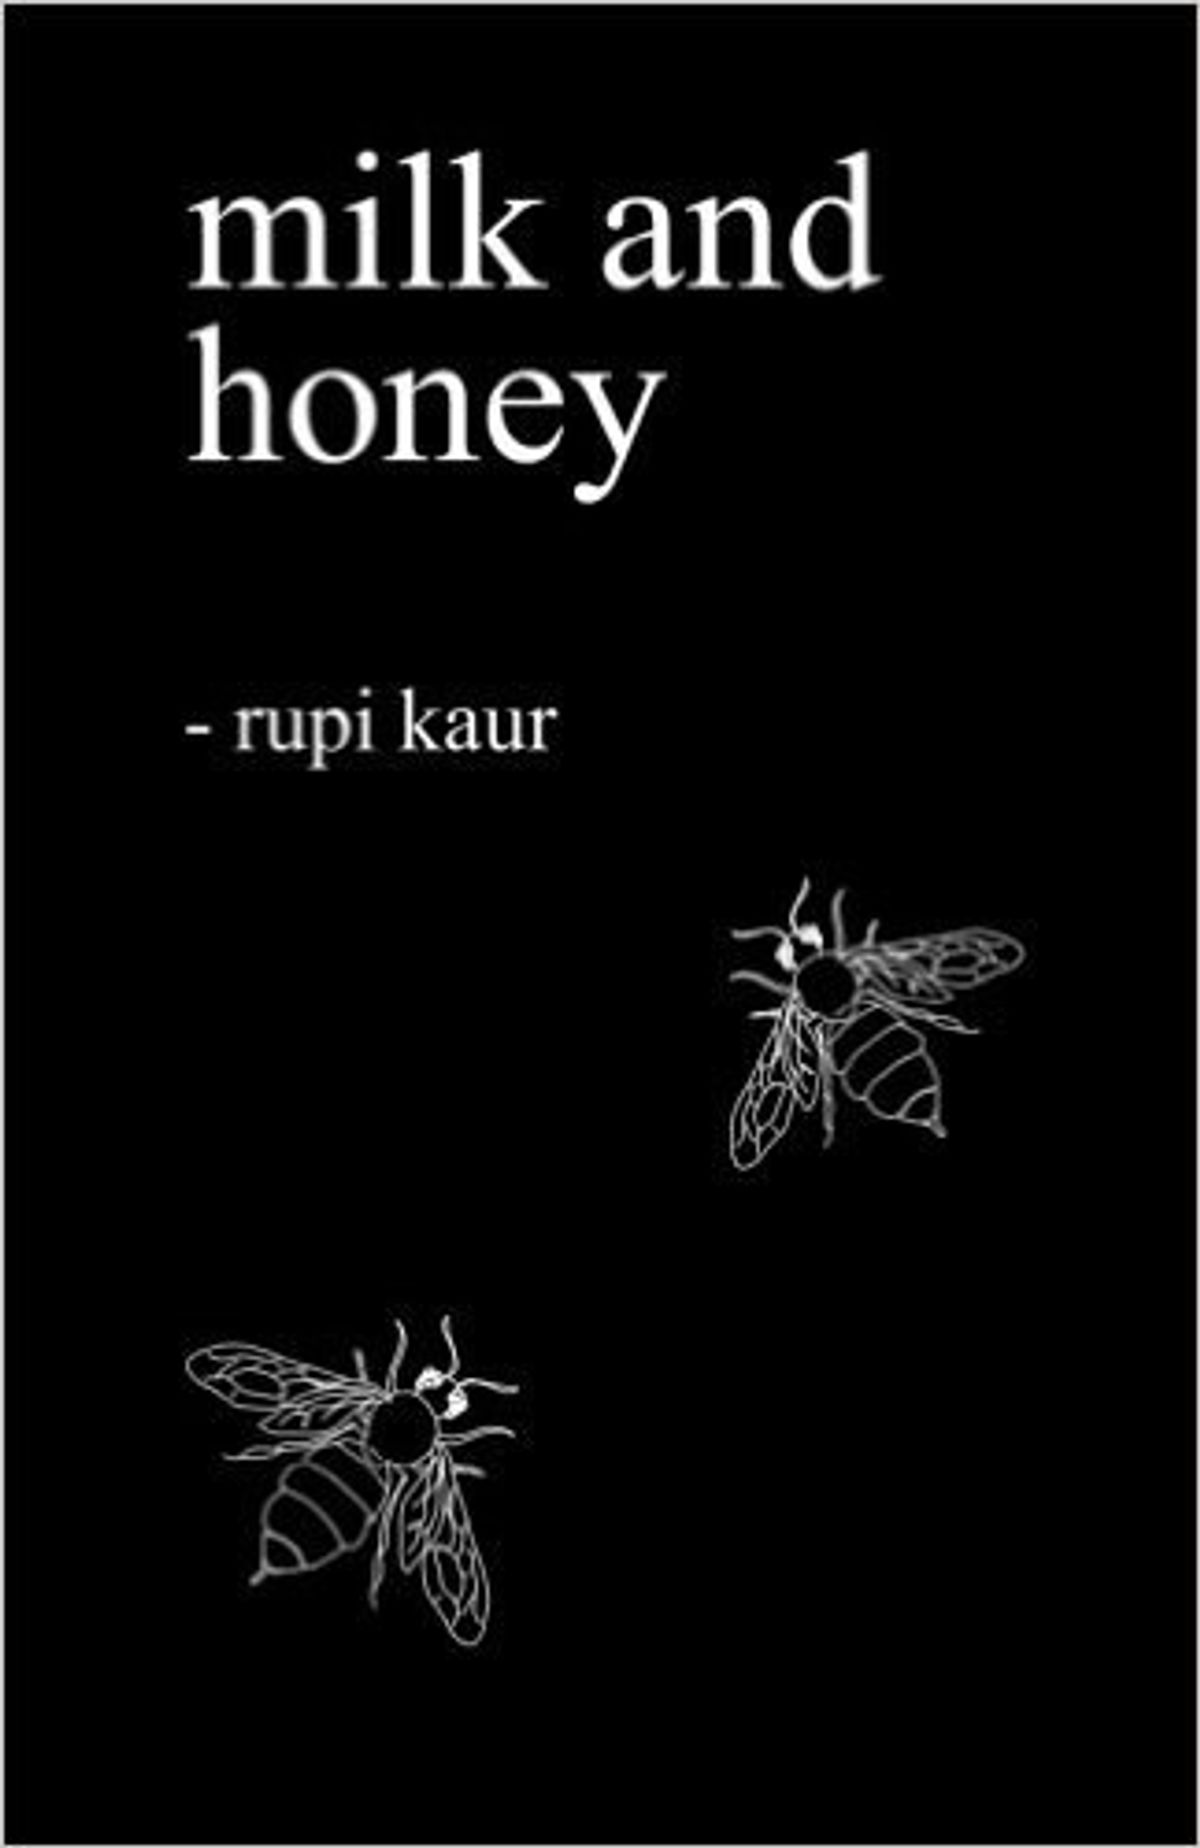 Give Poetry A Second Chance By Reading Rupi Kaur's "Milk And Honey"